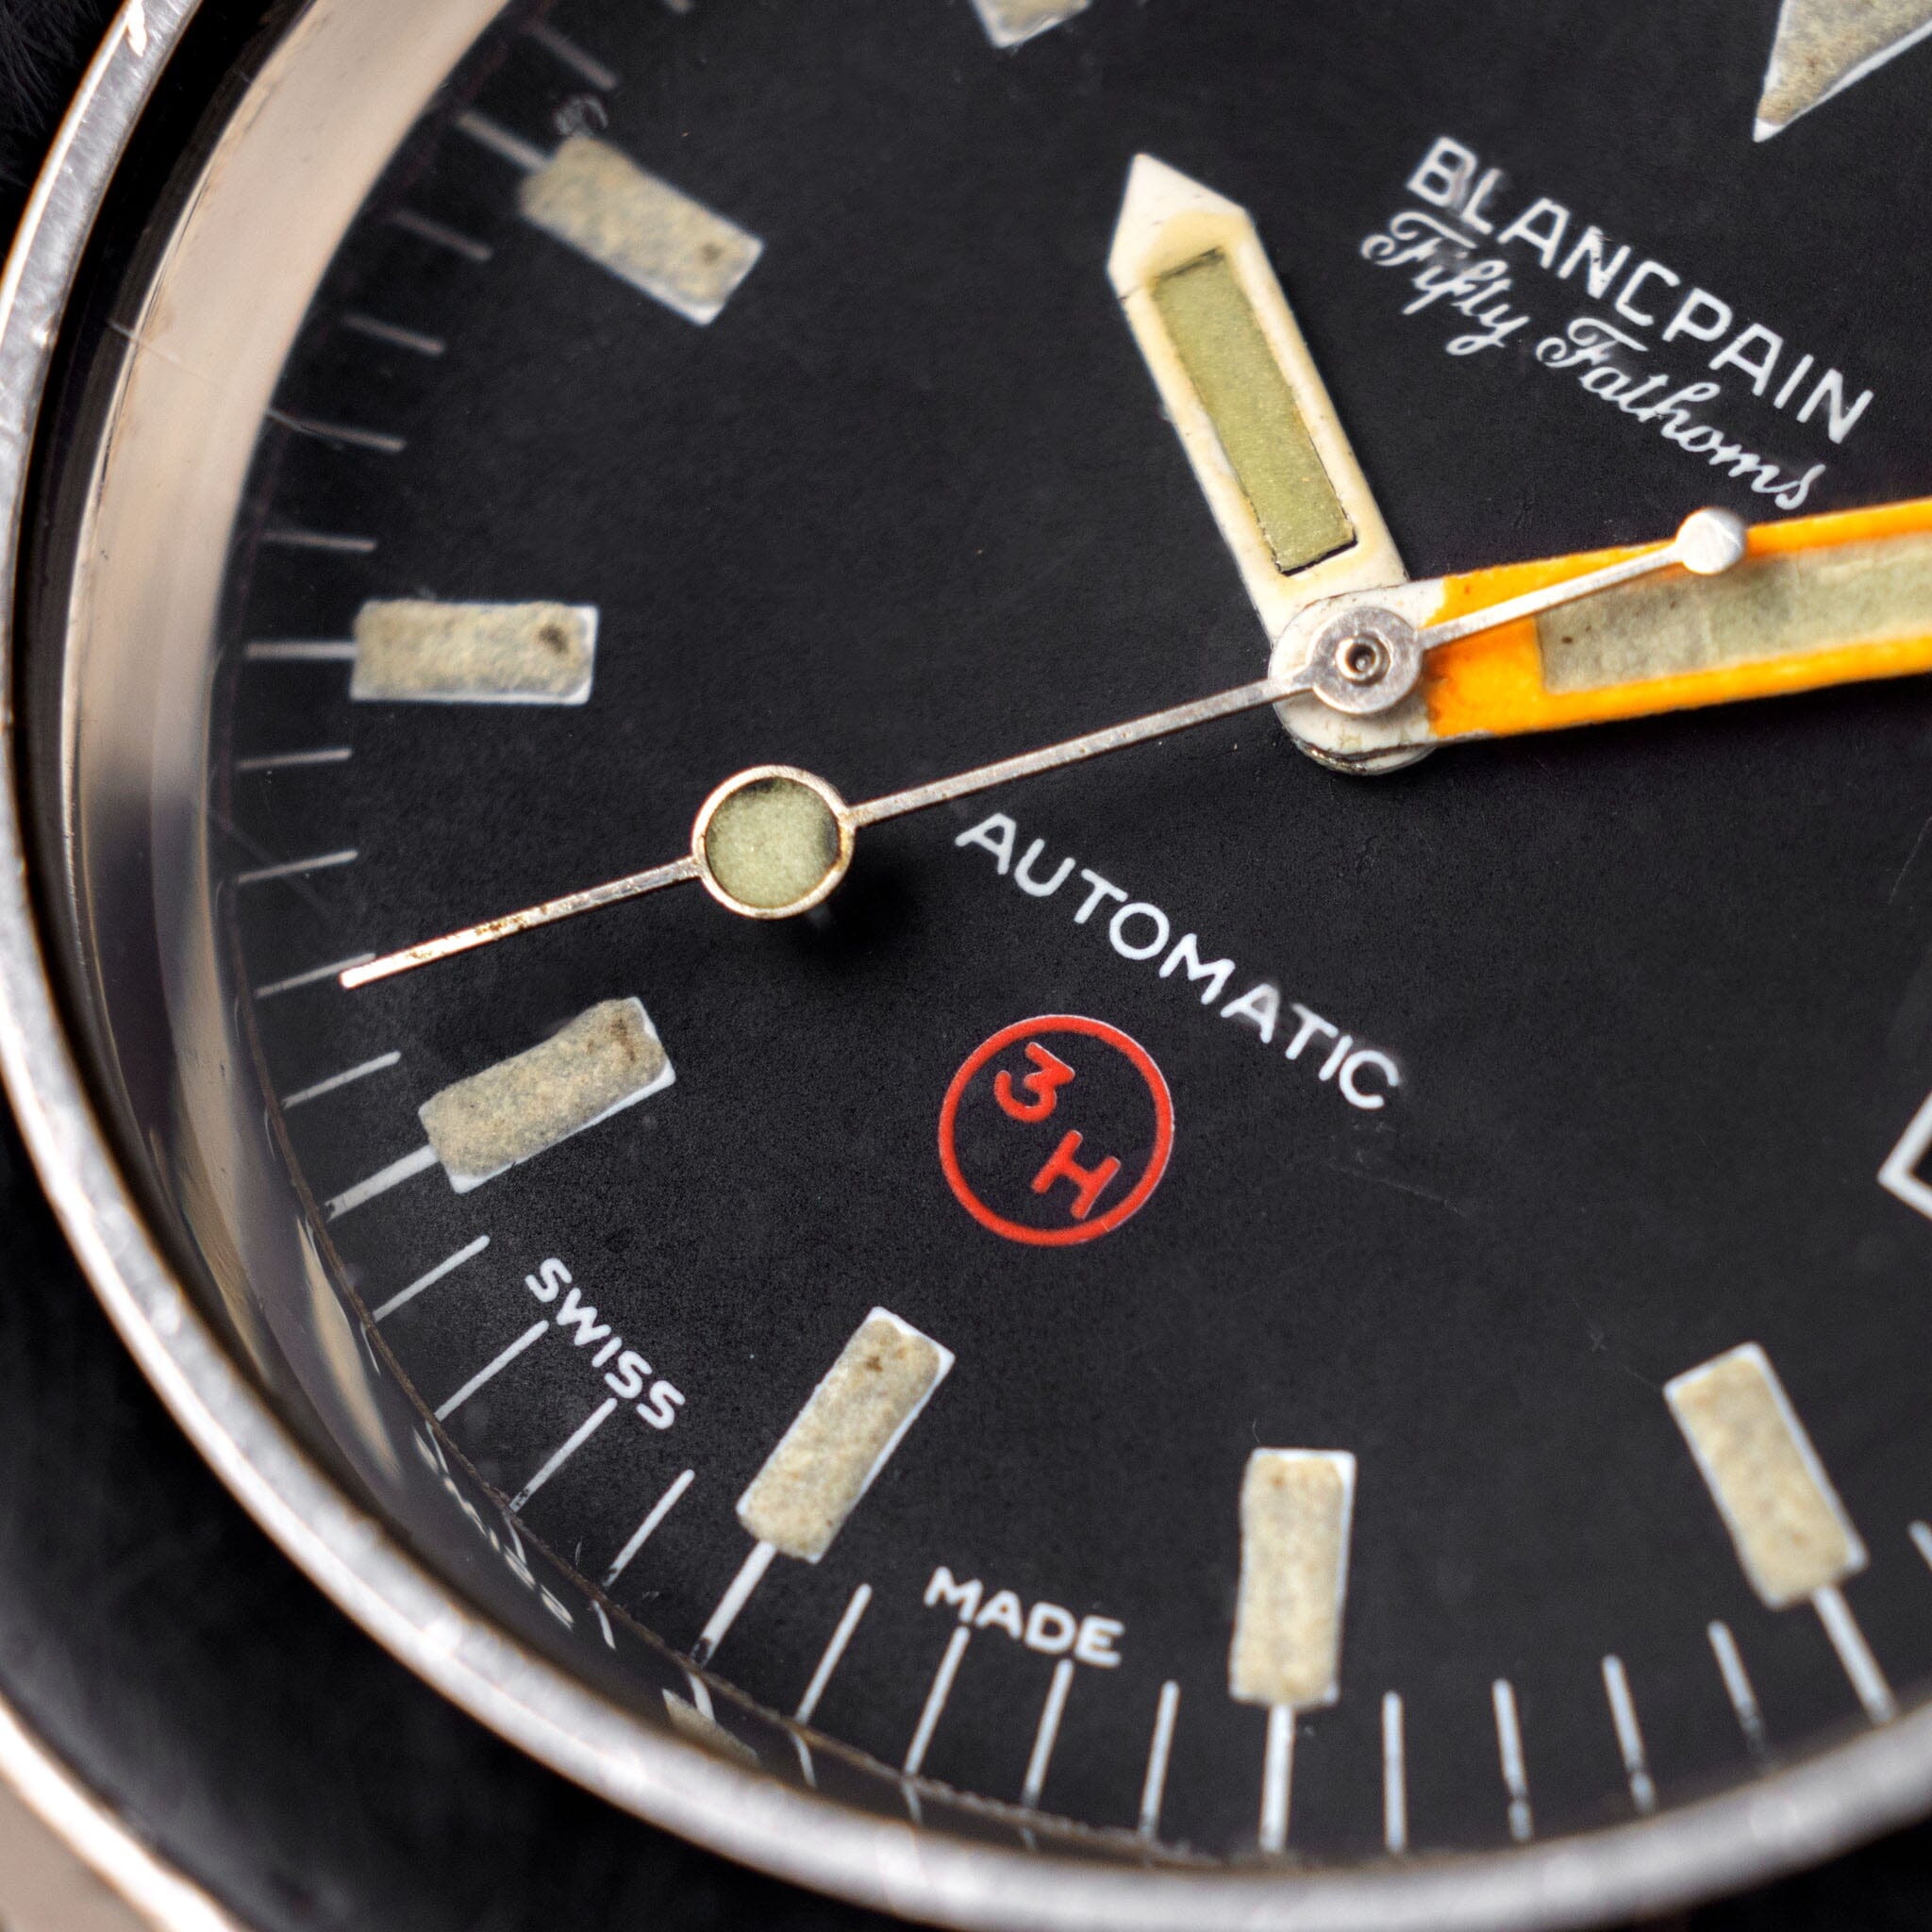 Blancpain Fifty Fathoms Military 3H Bund Issued Dive Watch